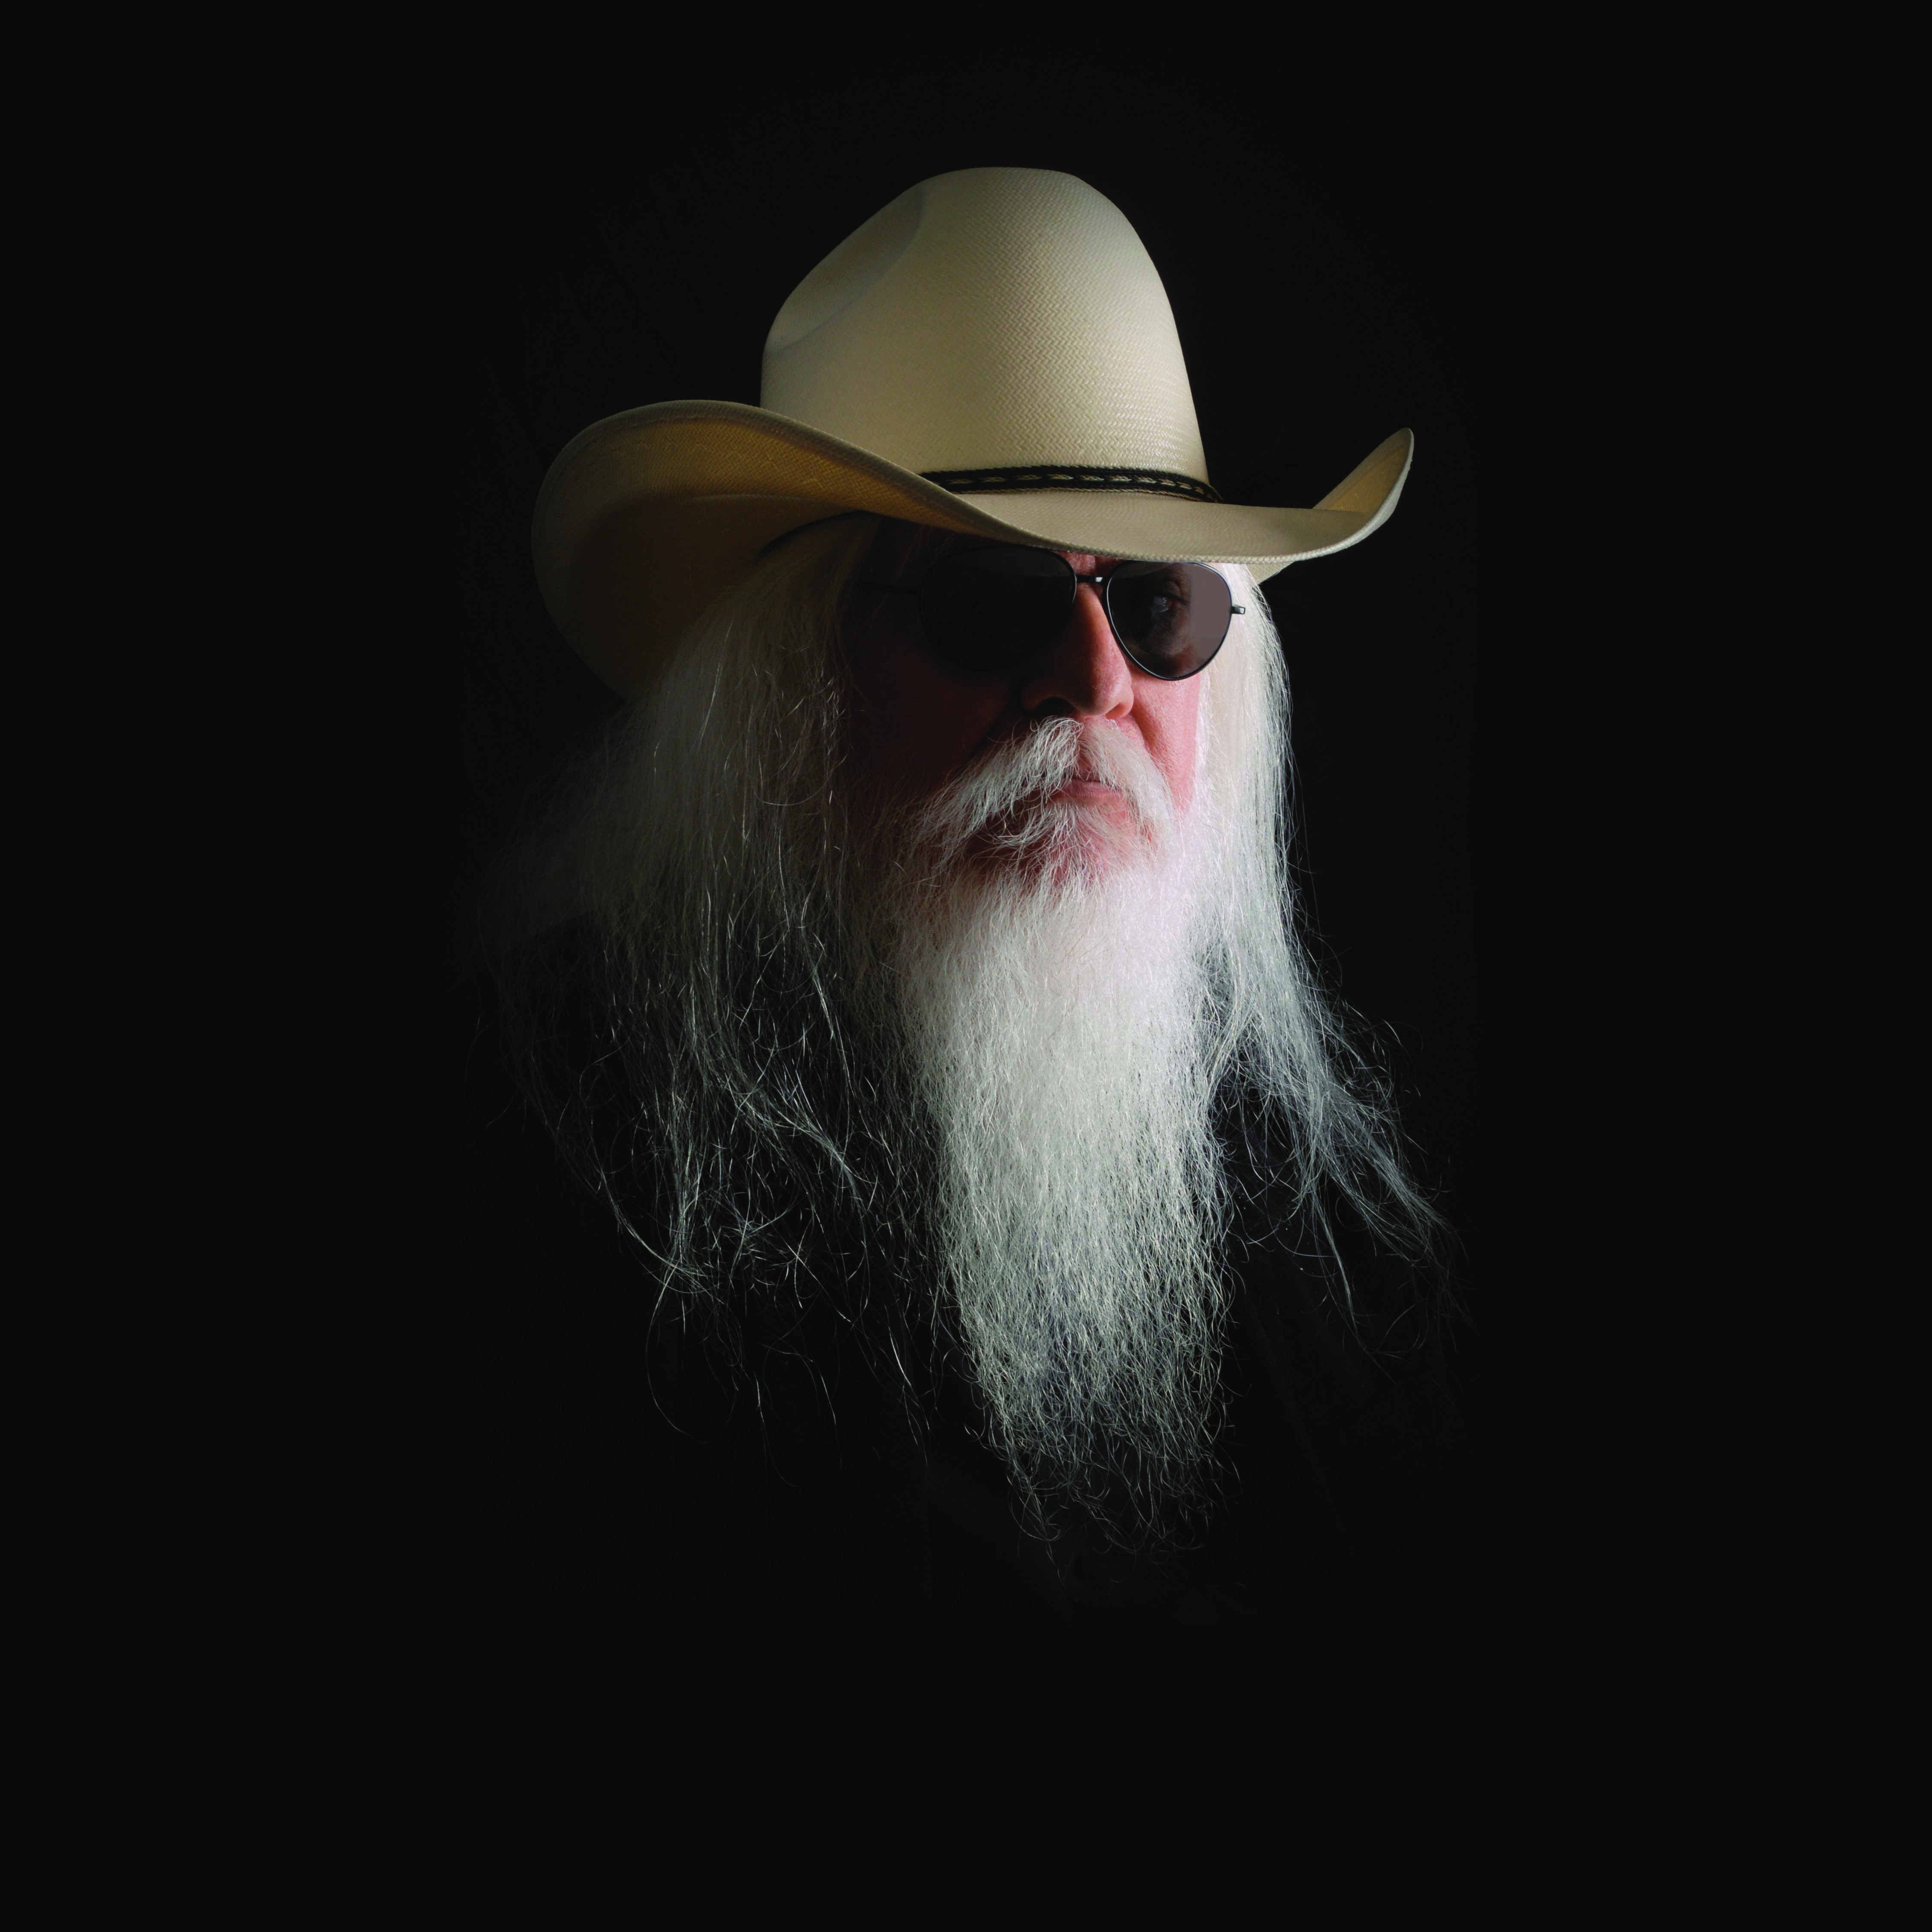 Leon Russell will belt out a surprising selection of eclectic hits on Sunday, Aug. 7 prior to a performance by Kid Rock.